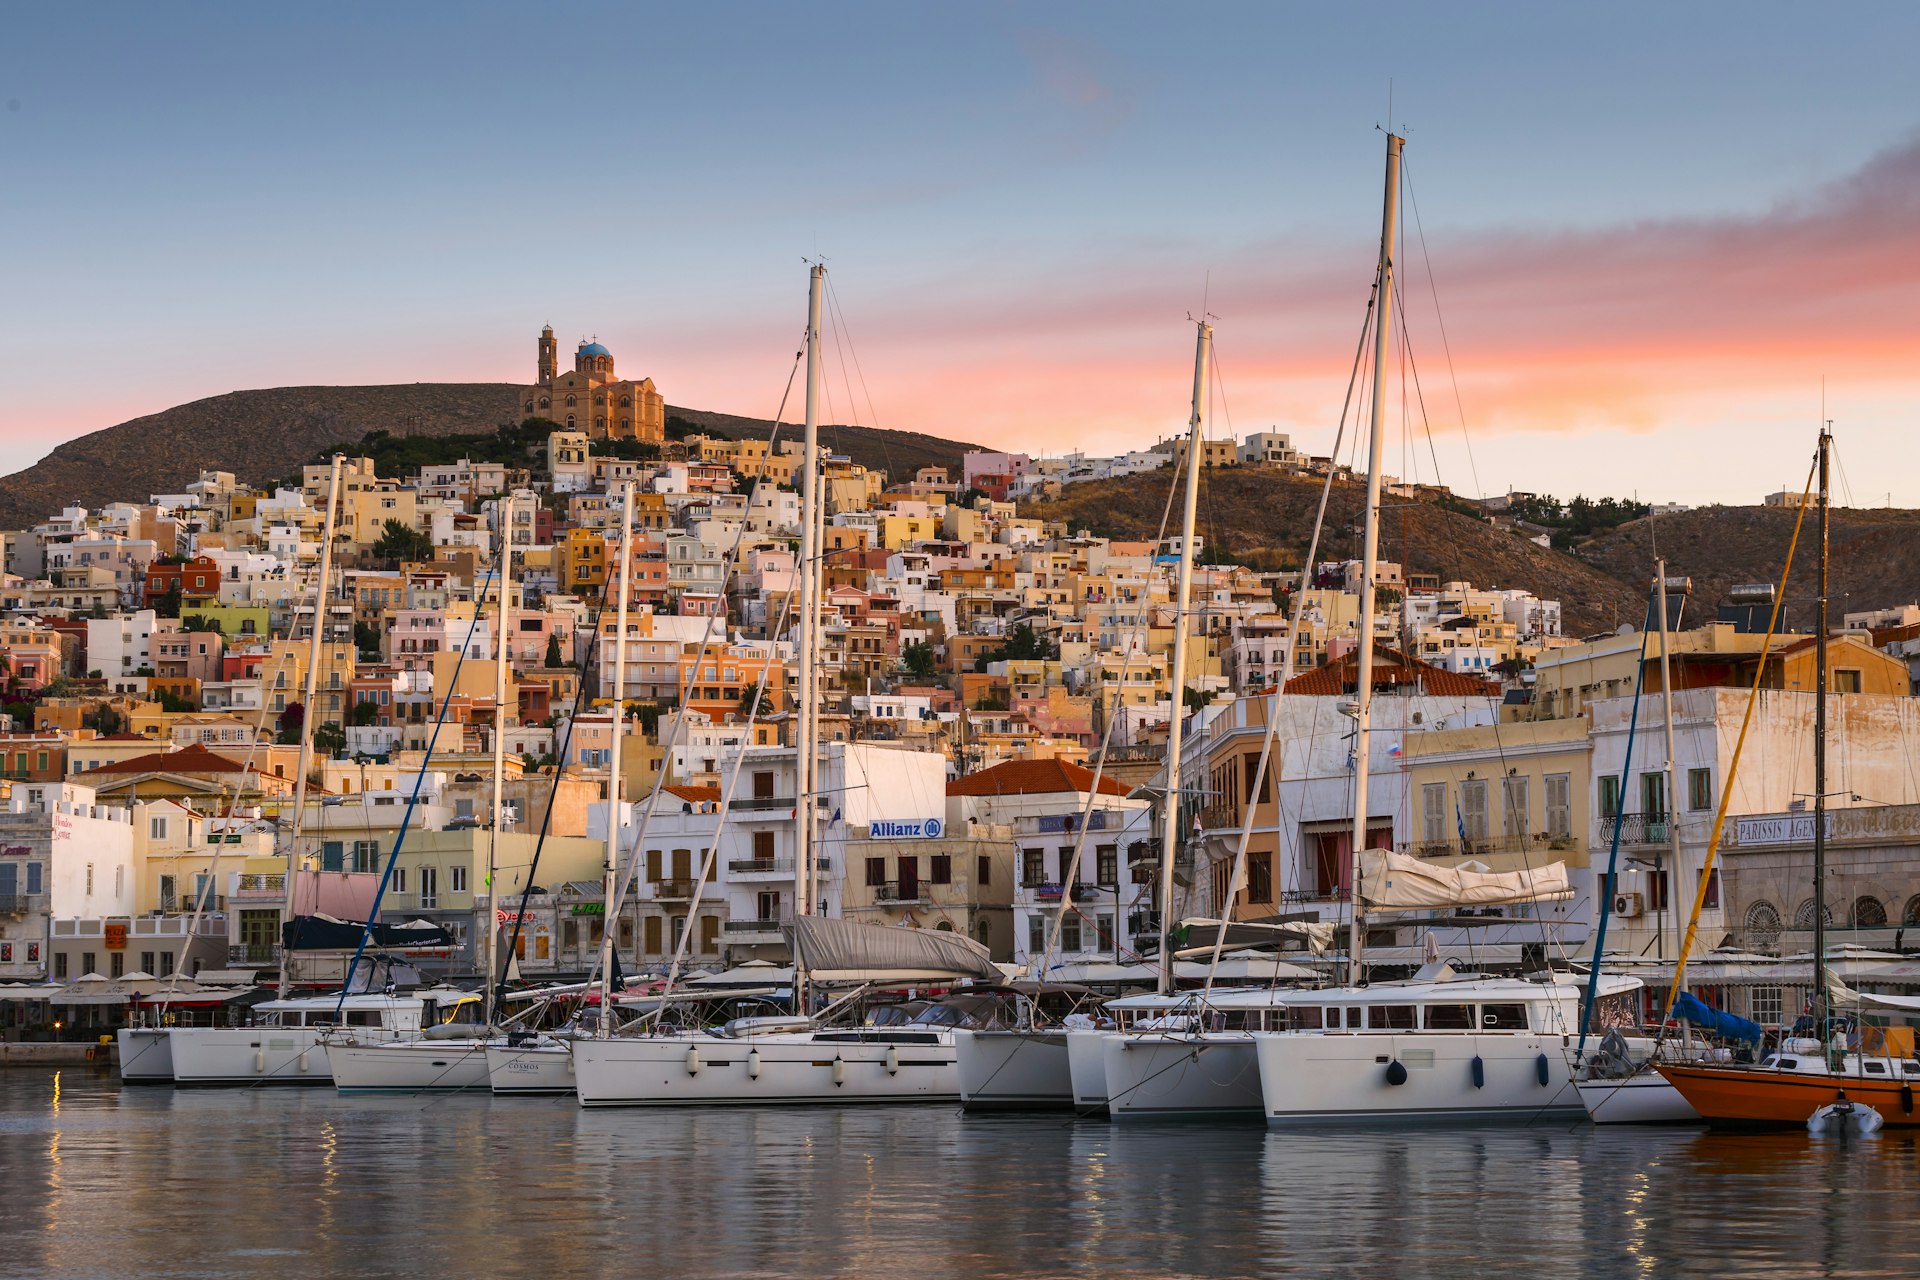 Ermoupoli town on Syros island in Greece with sailing boats docked in the bay